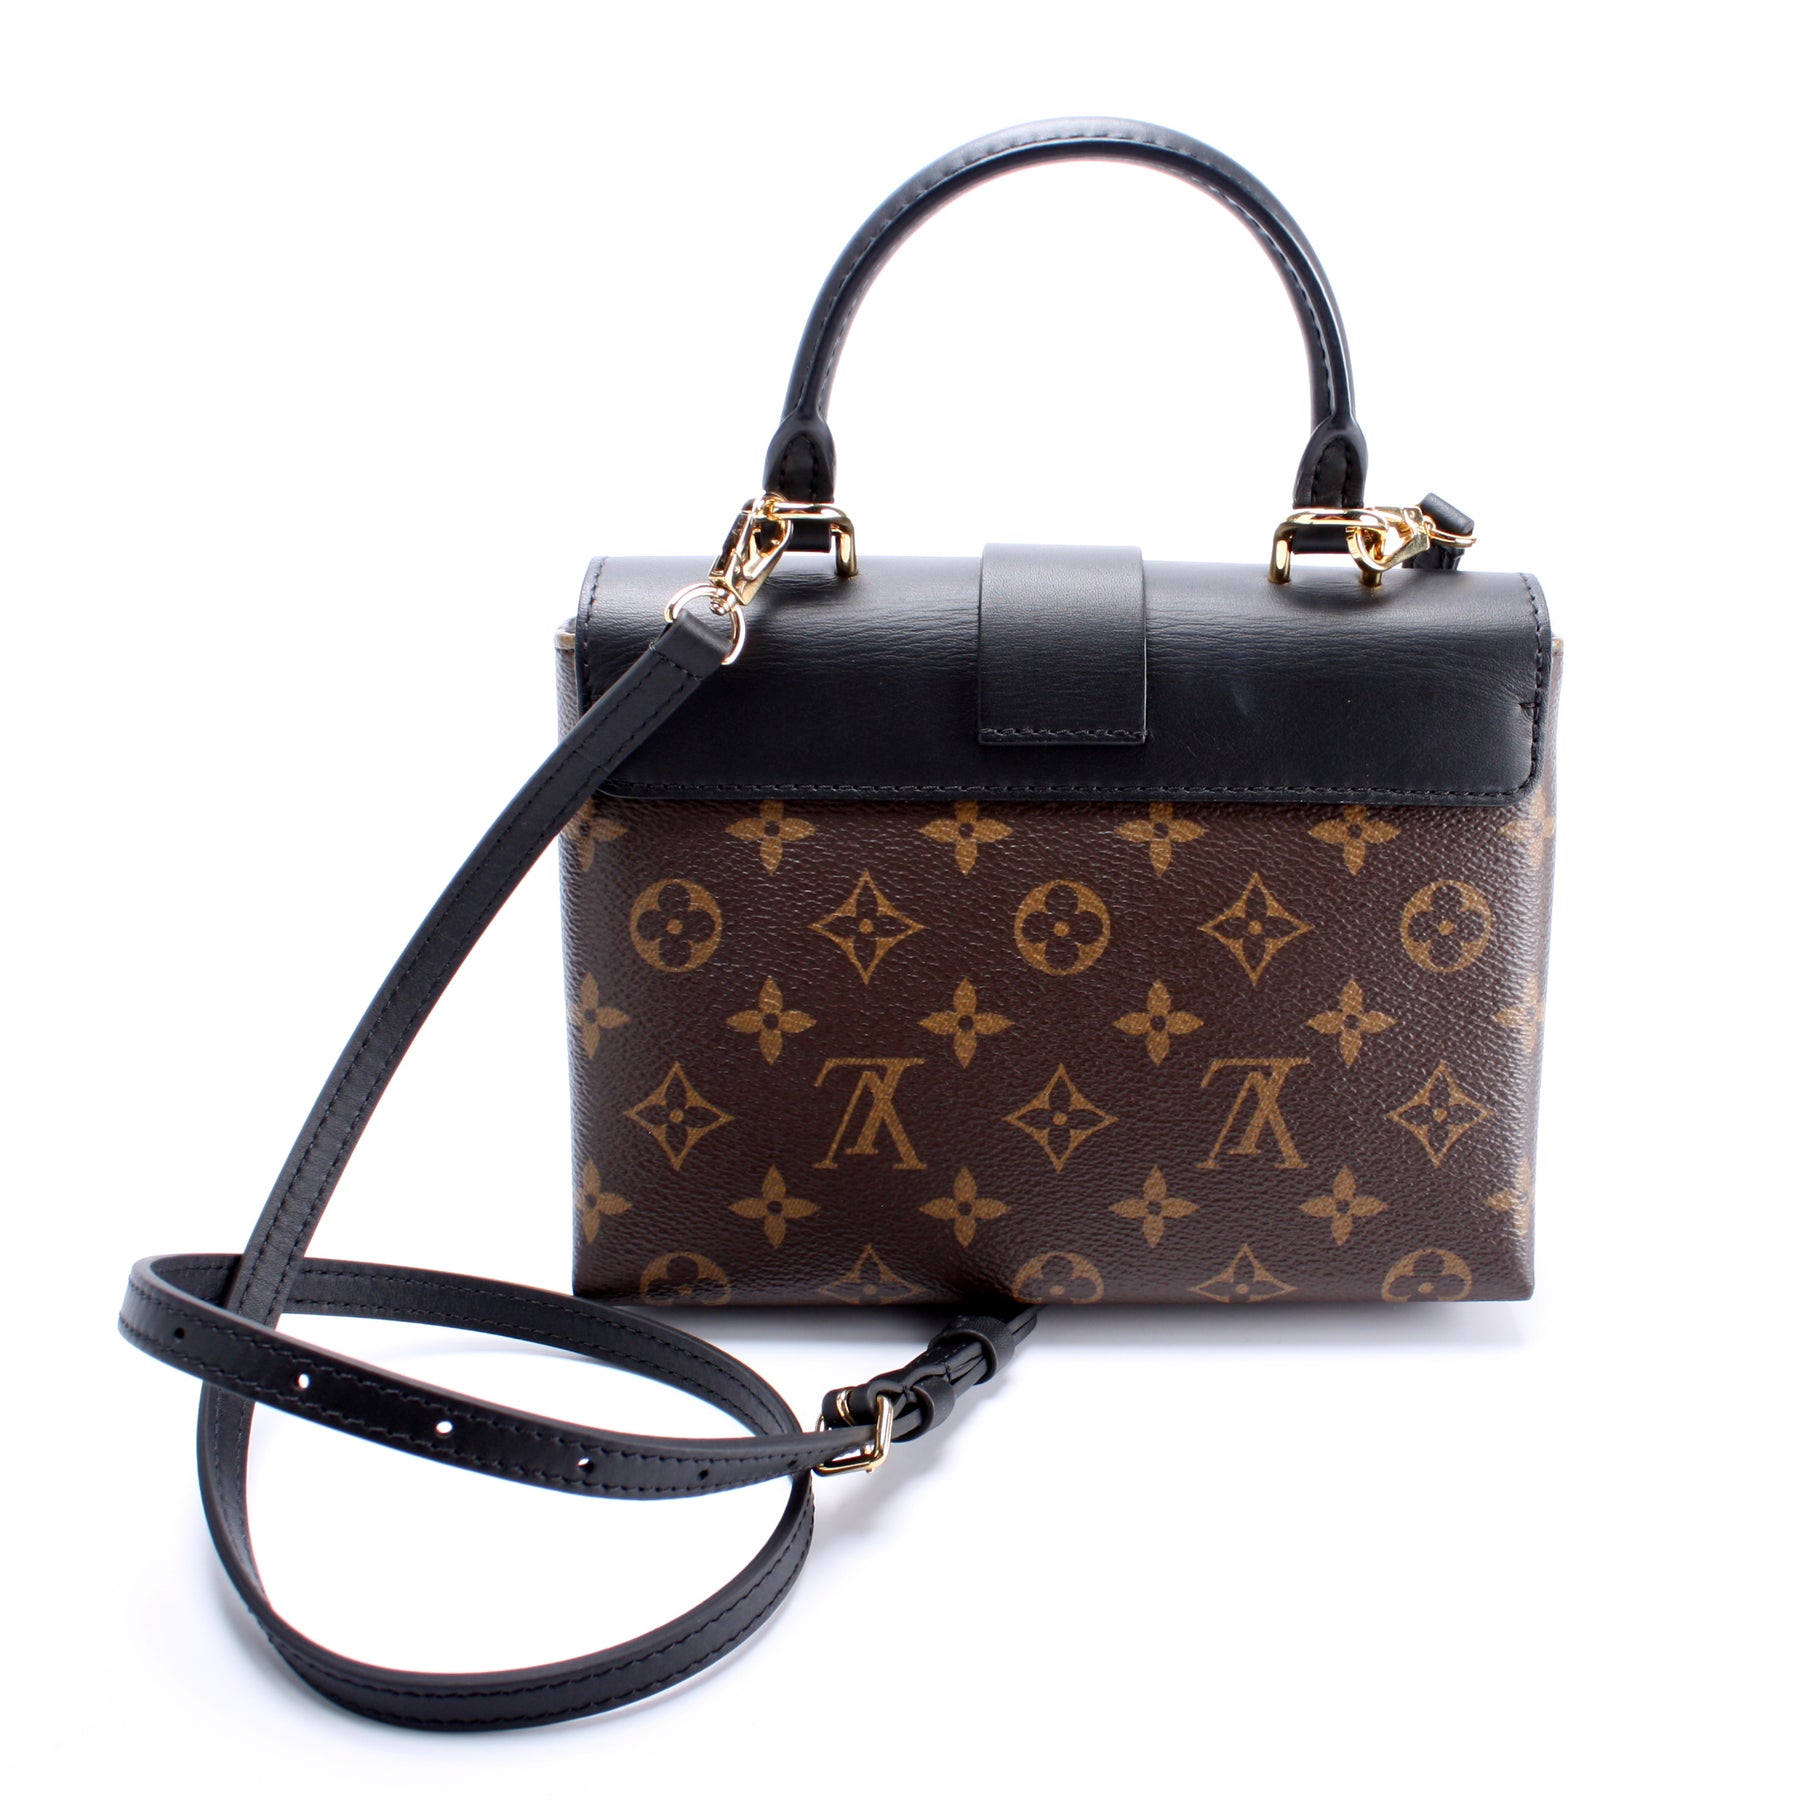 Louis Vuitton - Authenticated LOCKY Bb Handbag - Leather Black for Women, Very Good Condition